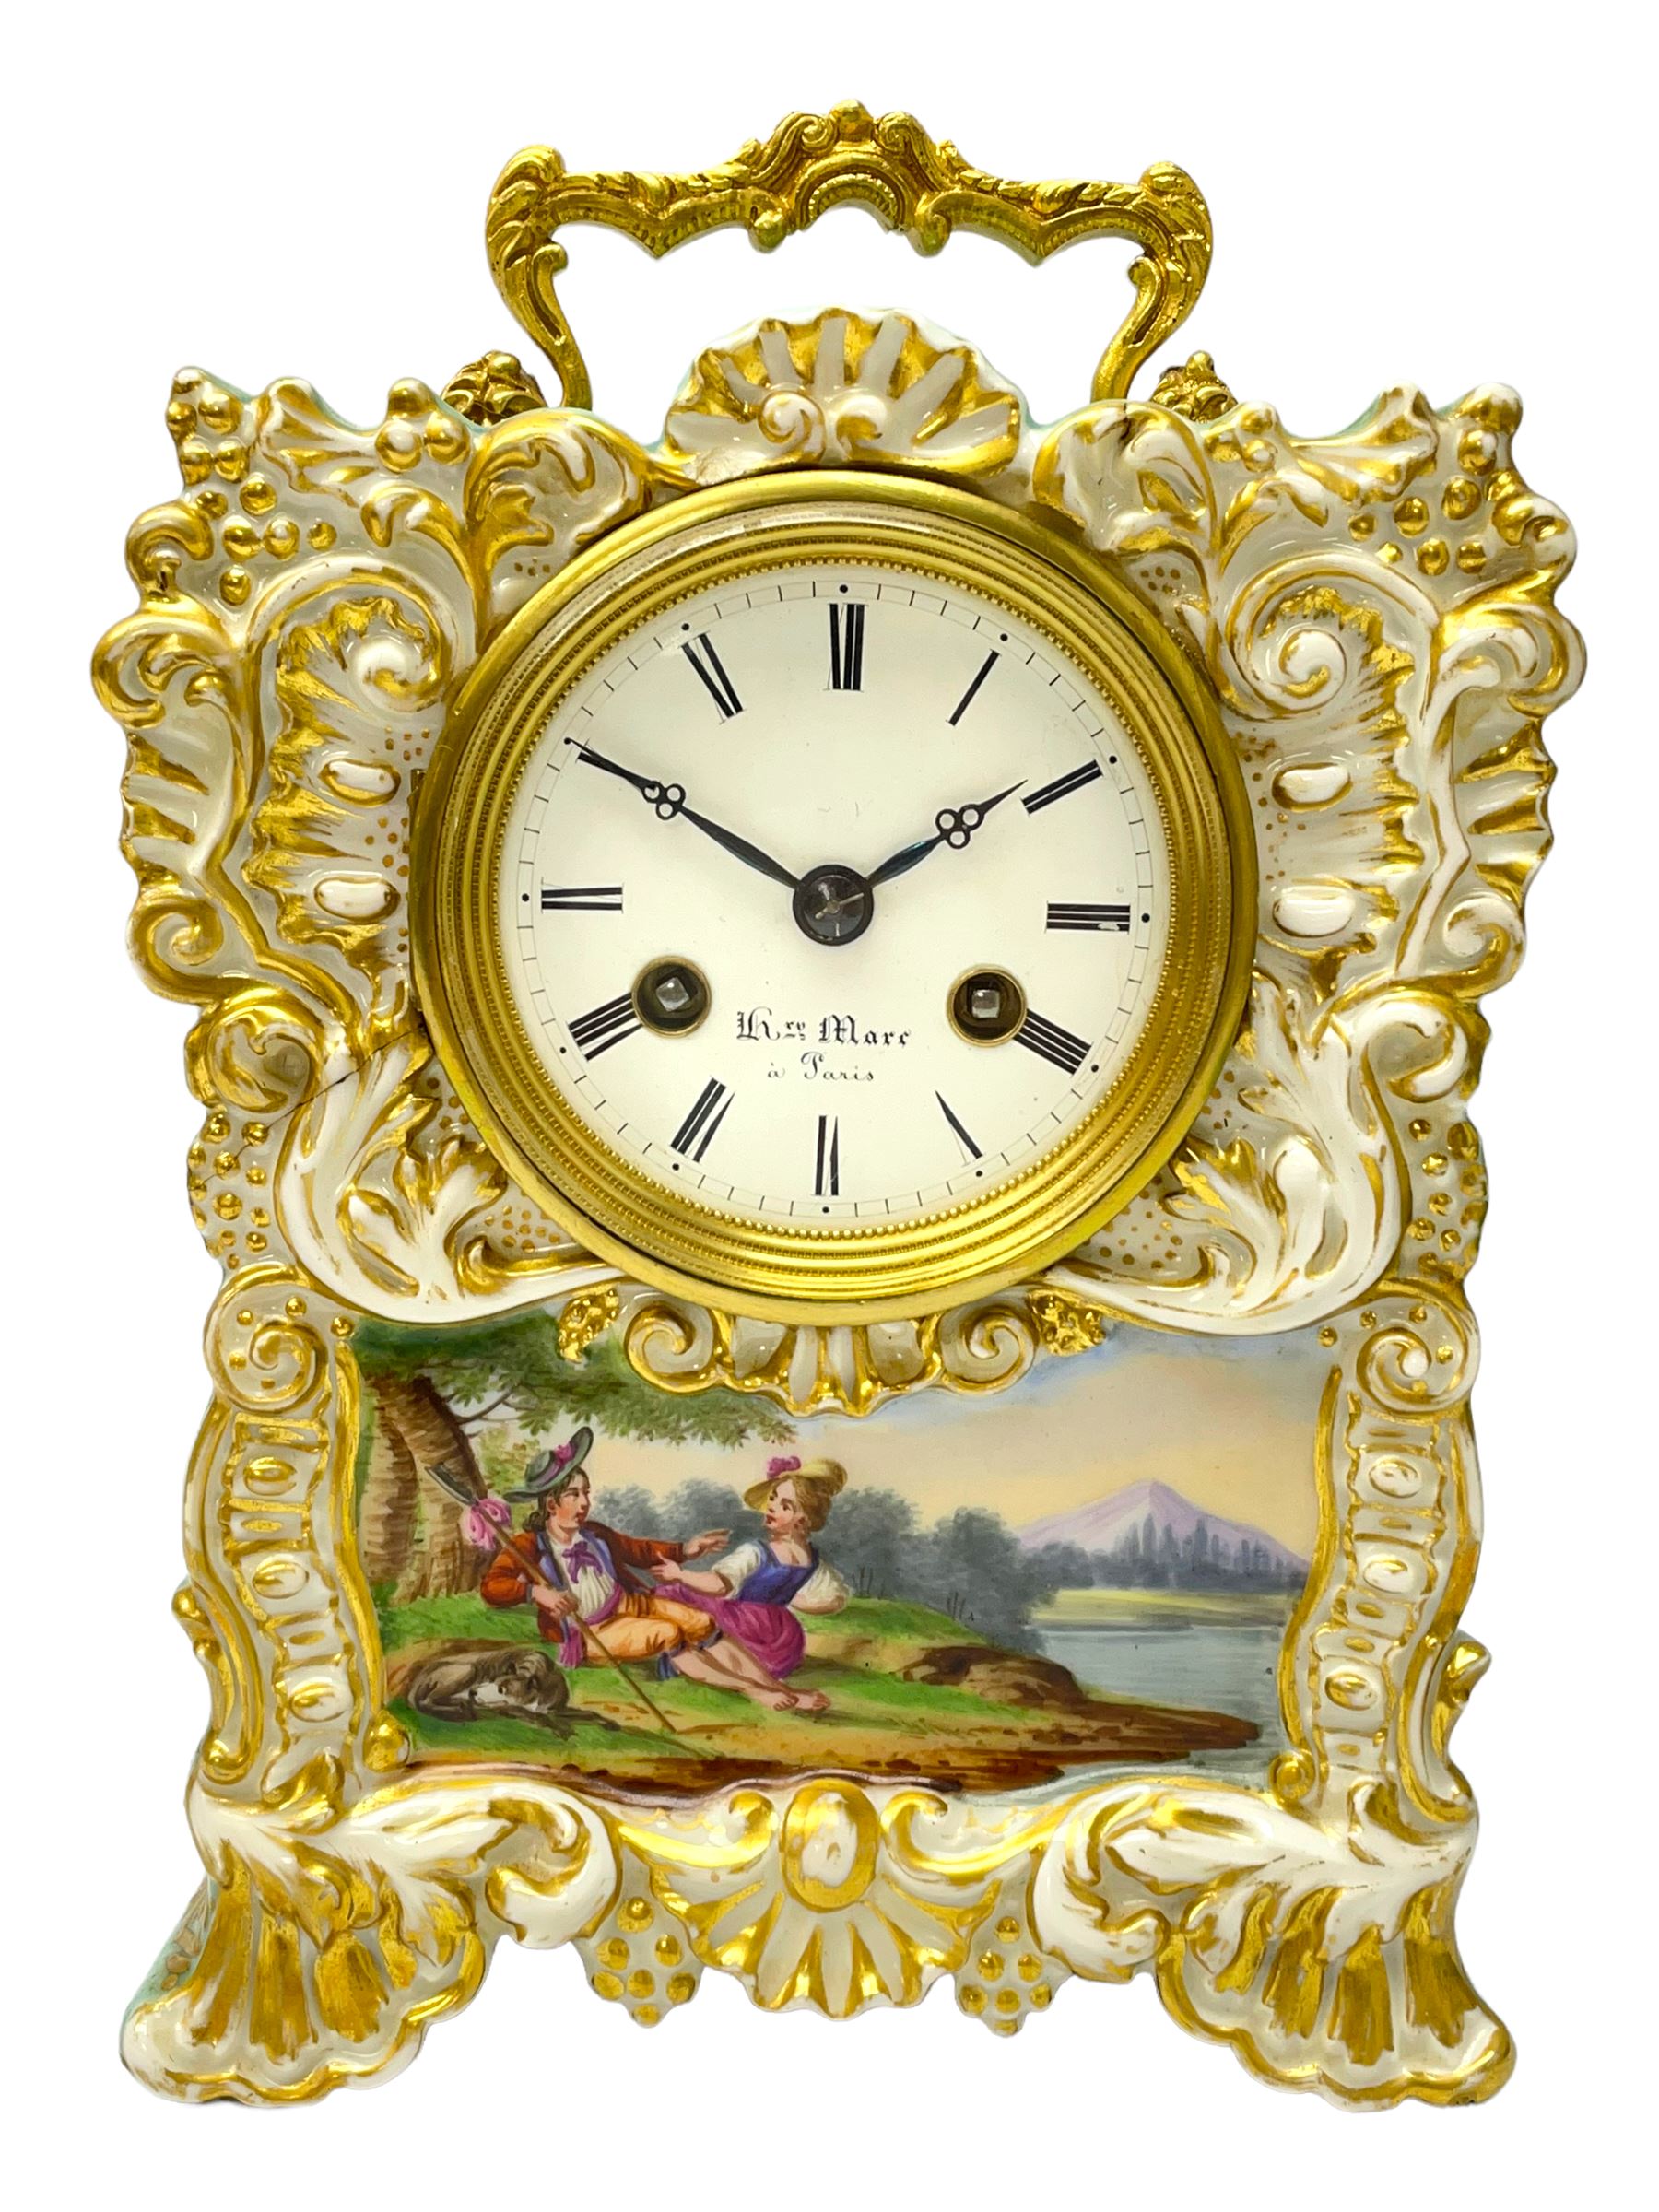 Continental - early 19th century porcelain mantle clock with a French eight-day movement